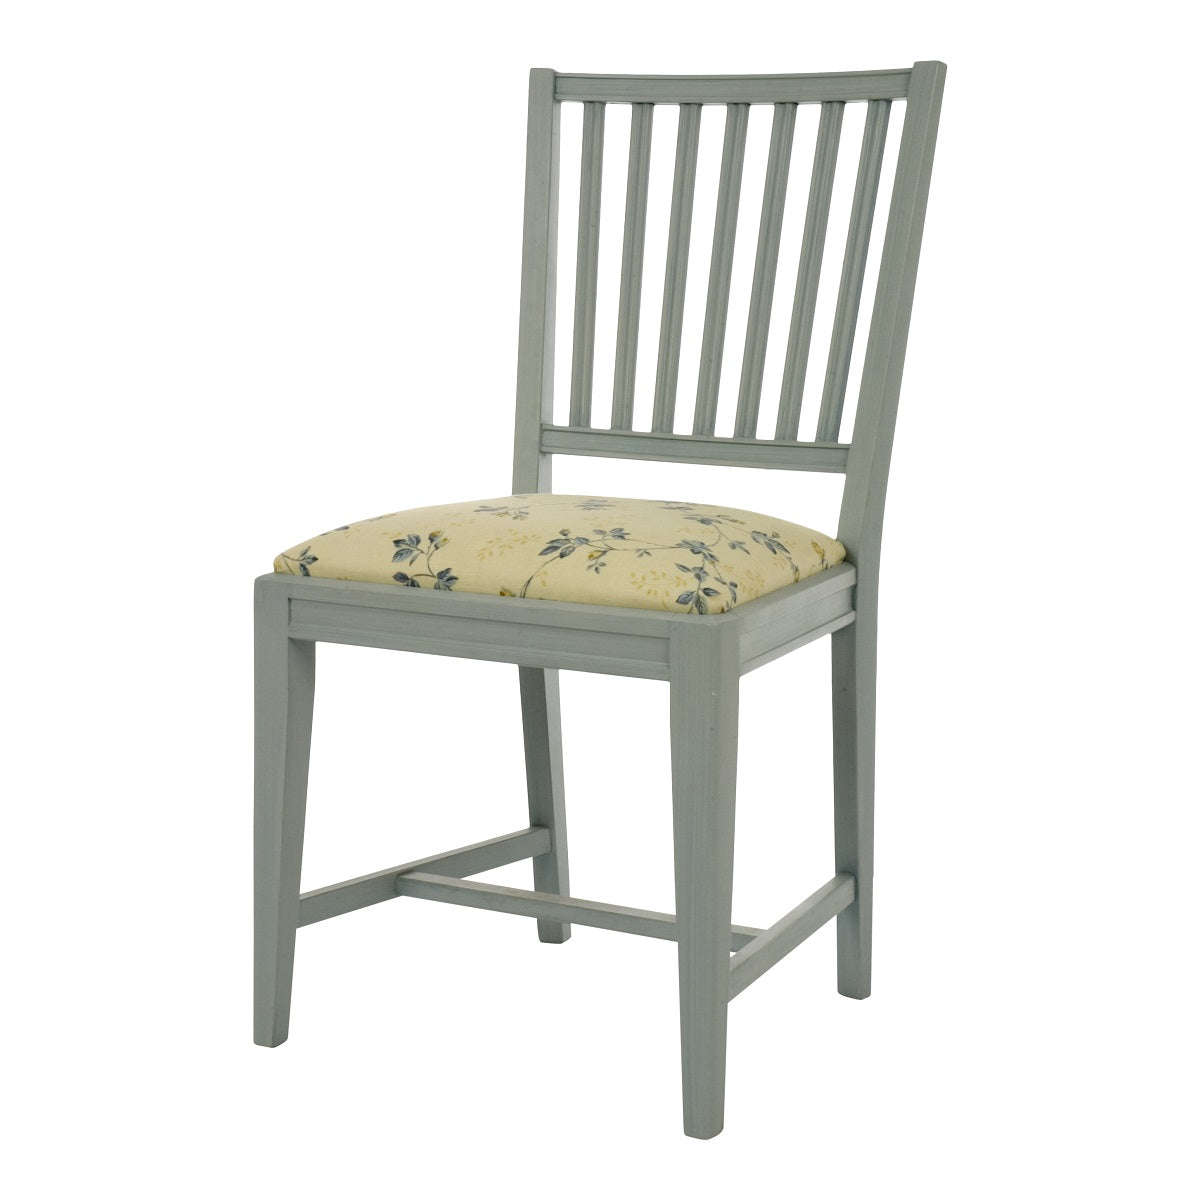 Leksand Wooden Chair with Upholstered Seat